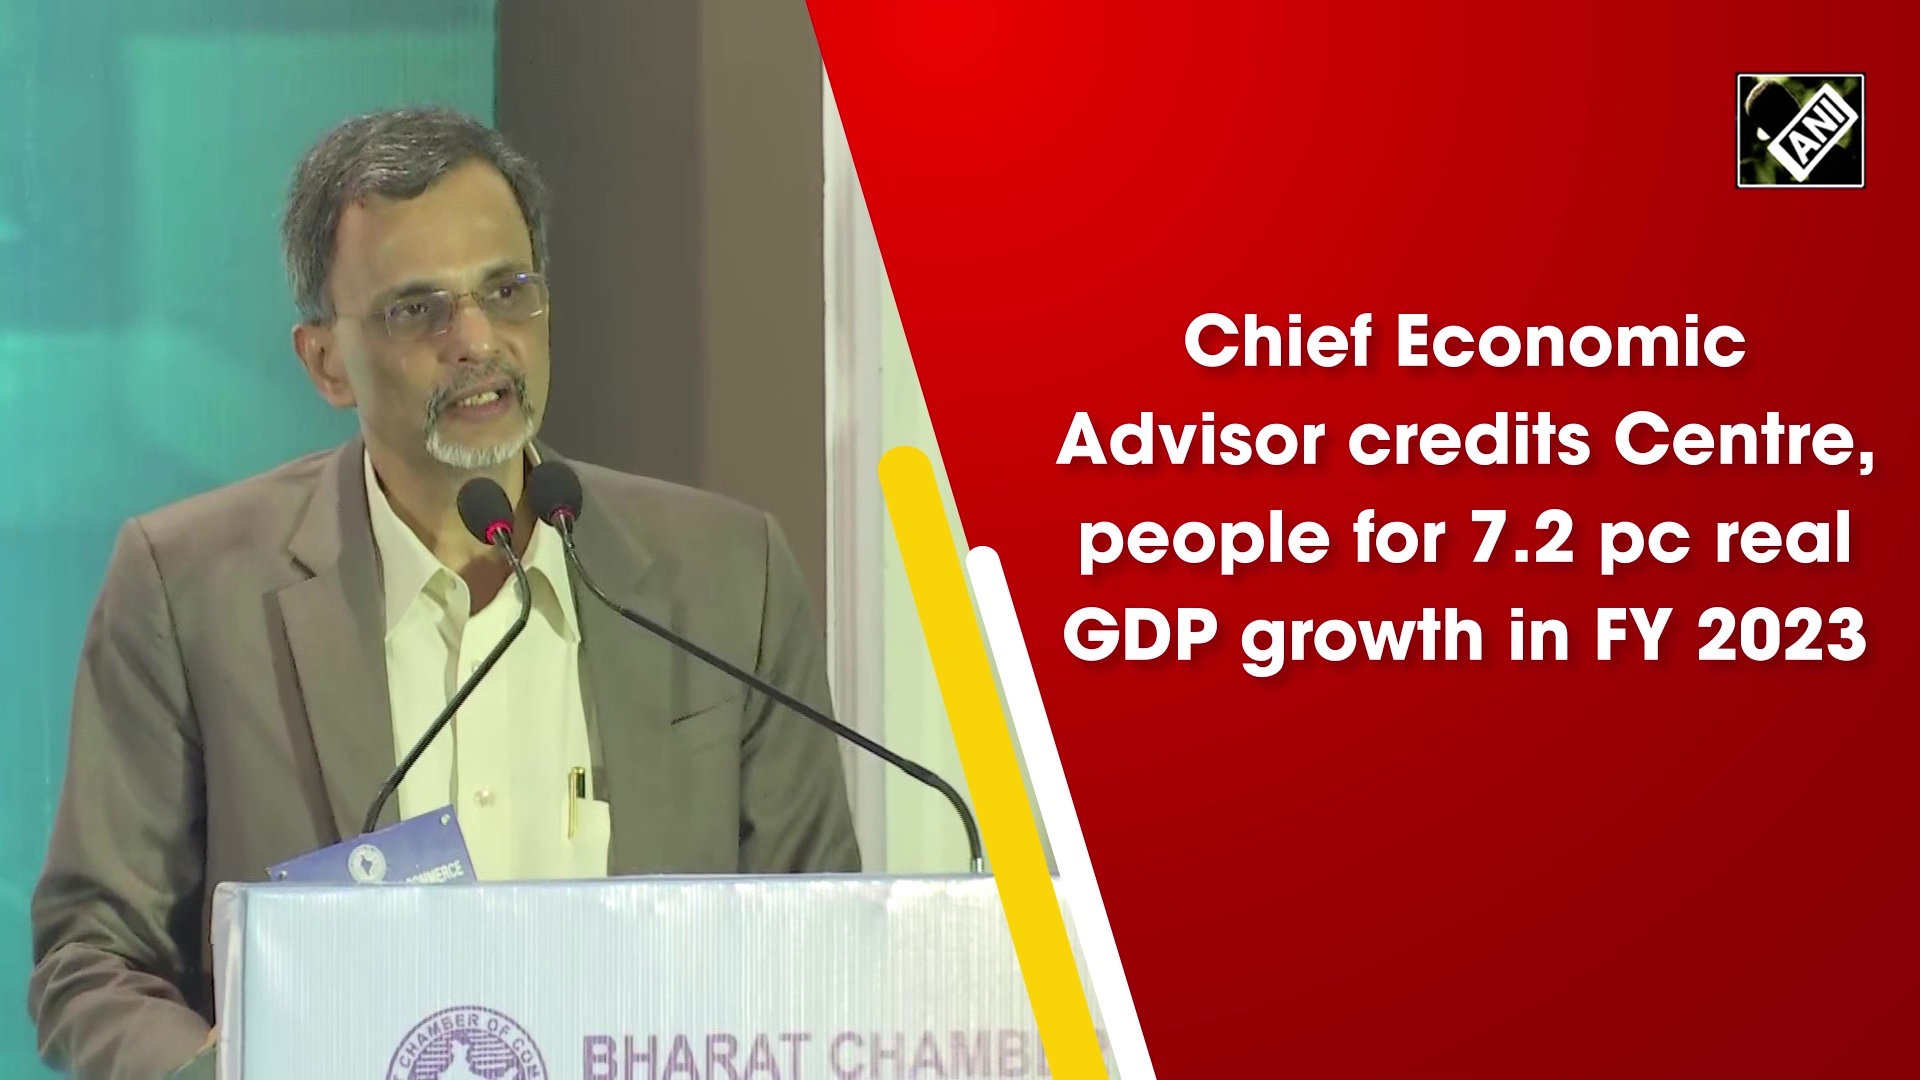 Chief Economic Advisor credits Centre, people for 7.2 pc real GDP growth in FY 2023